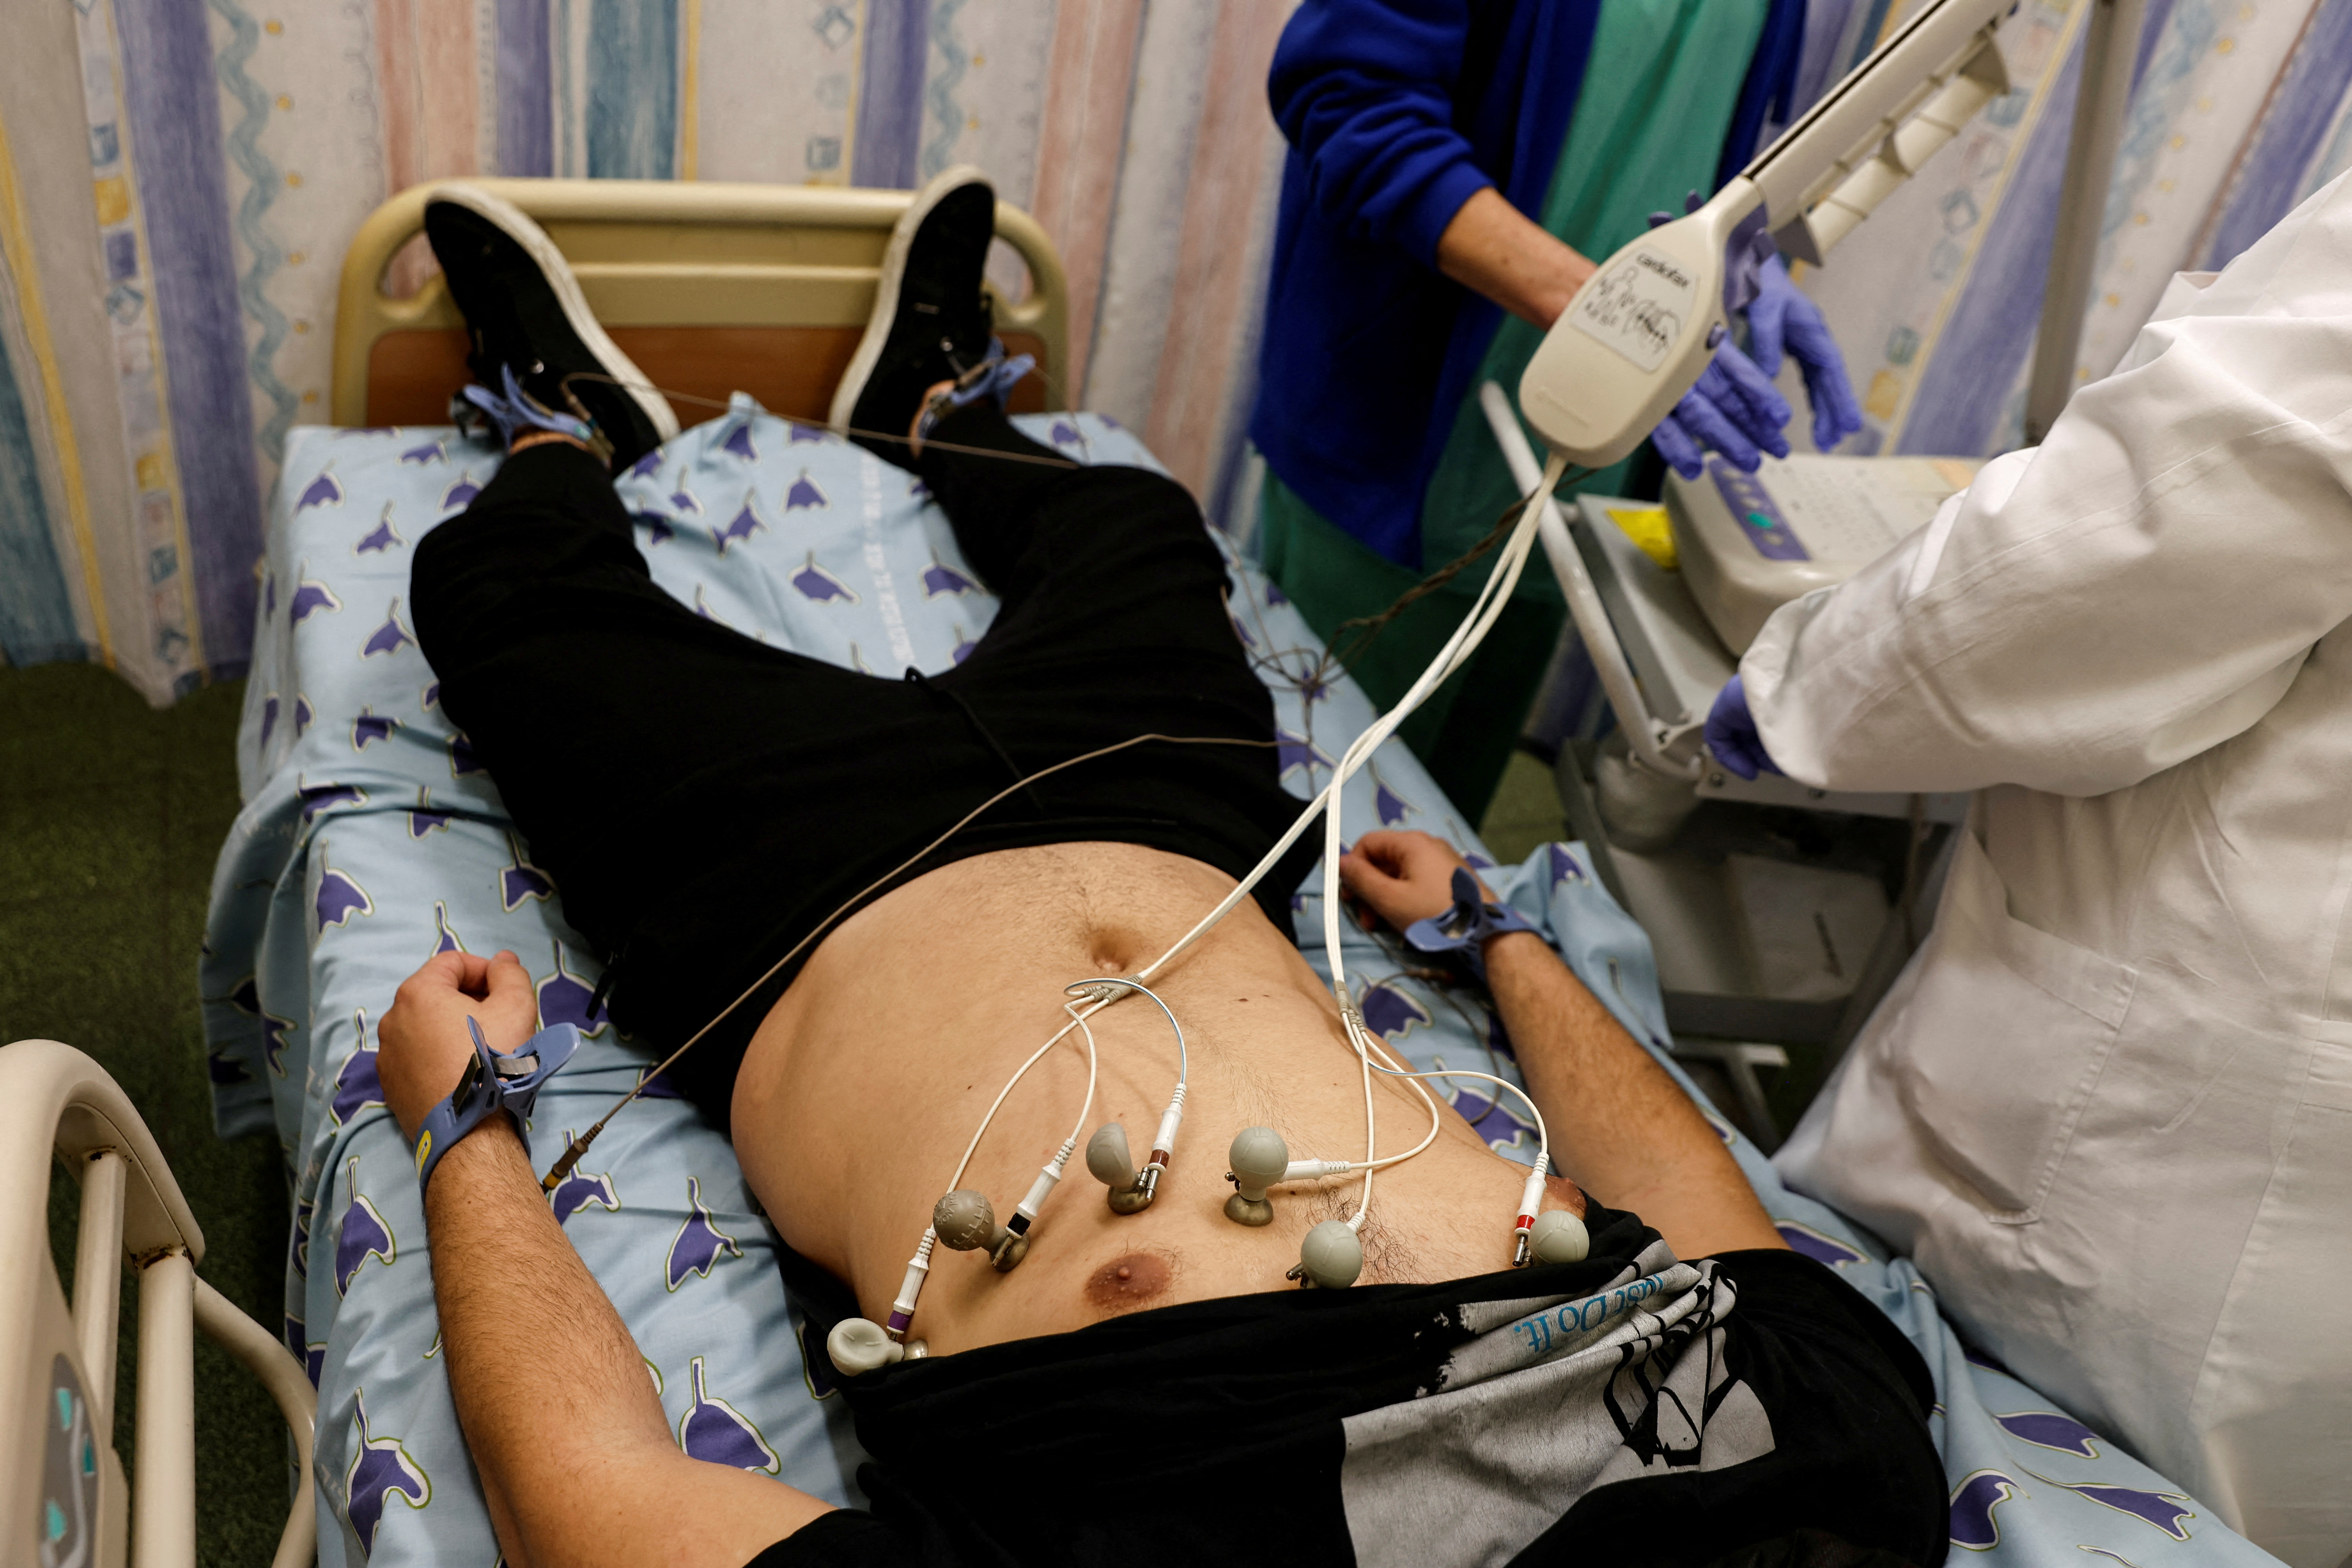 A patient suffering from Long COVID is examined in the post-coronavirus disease (COVID-19) clinic of Ichilov Hospital in Tel Aviv